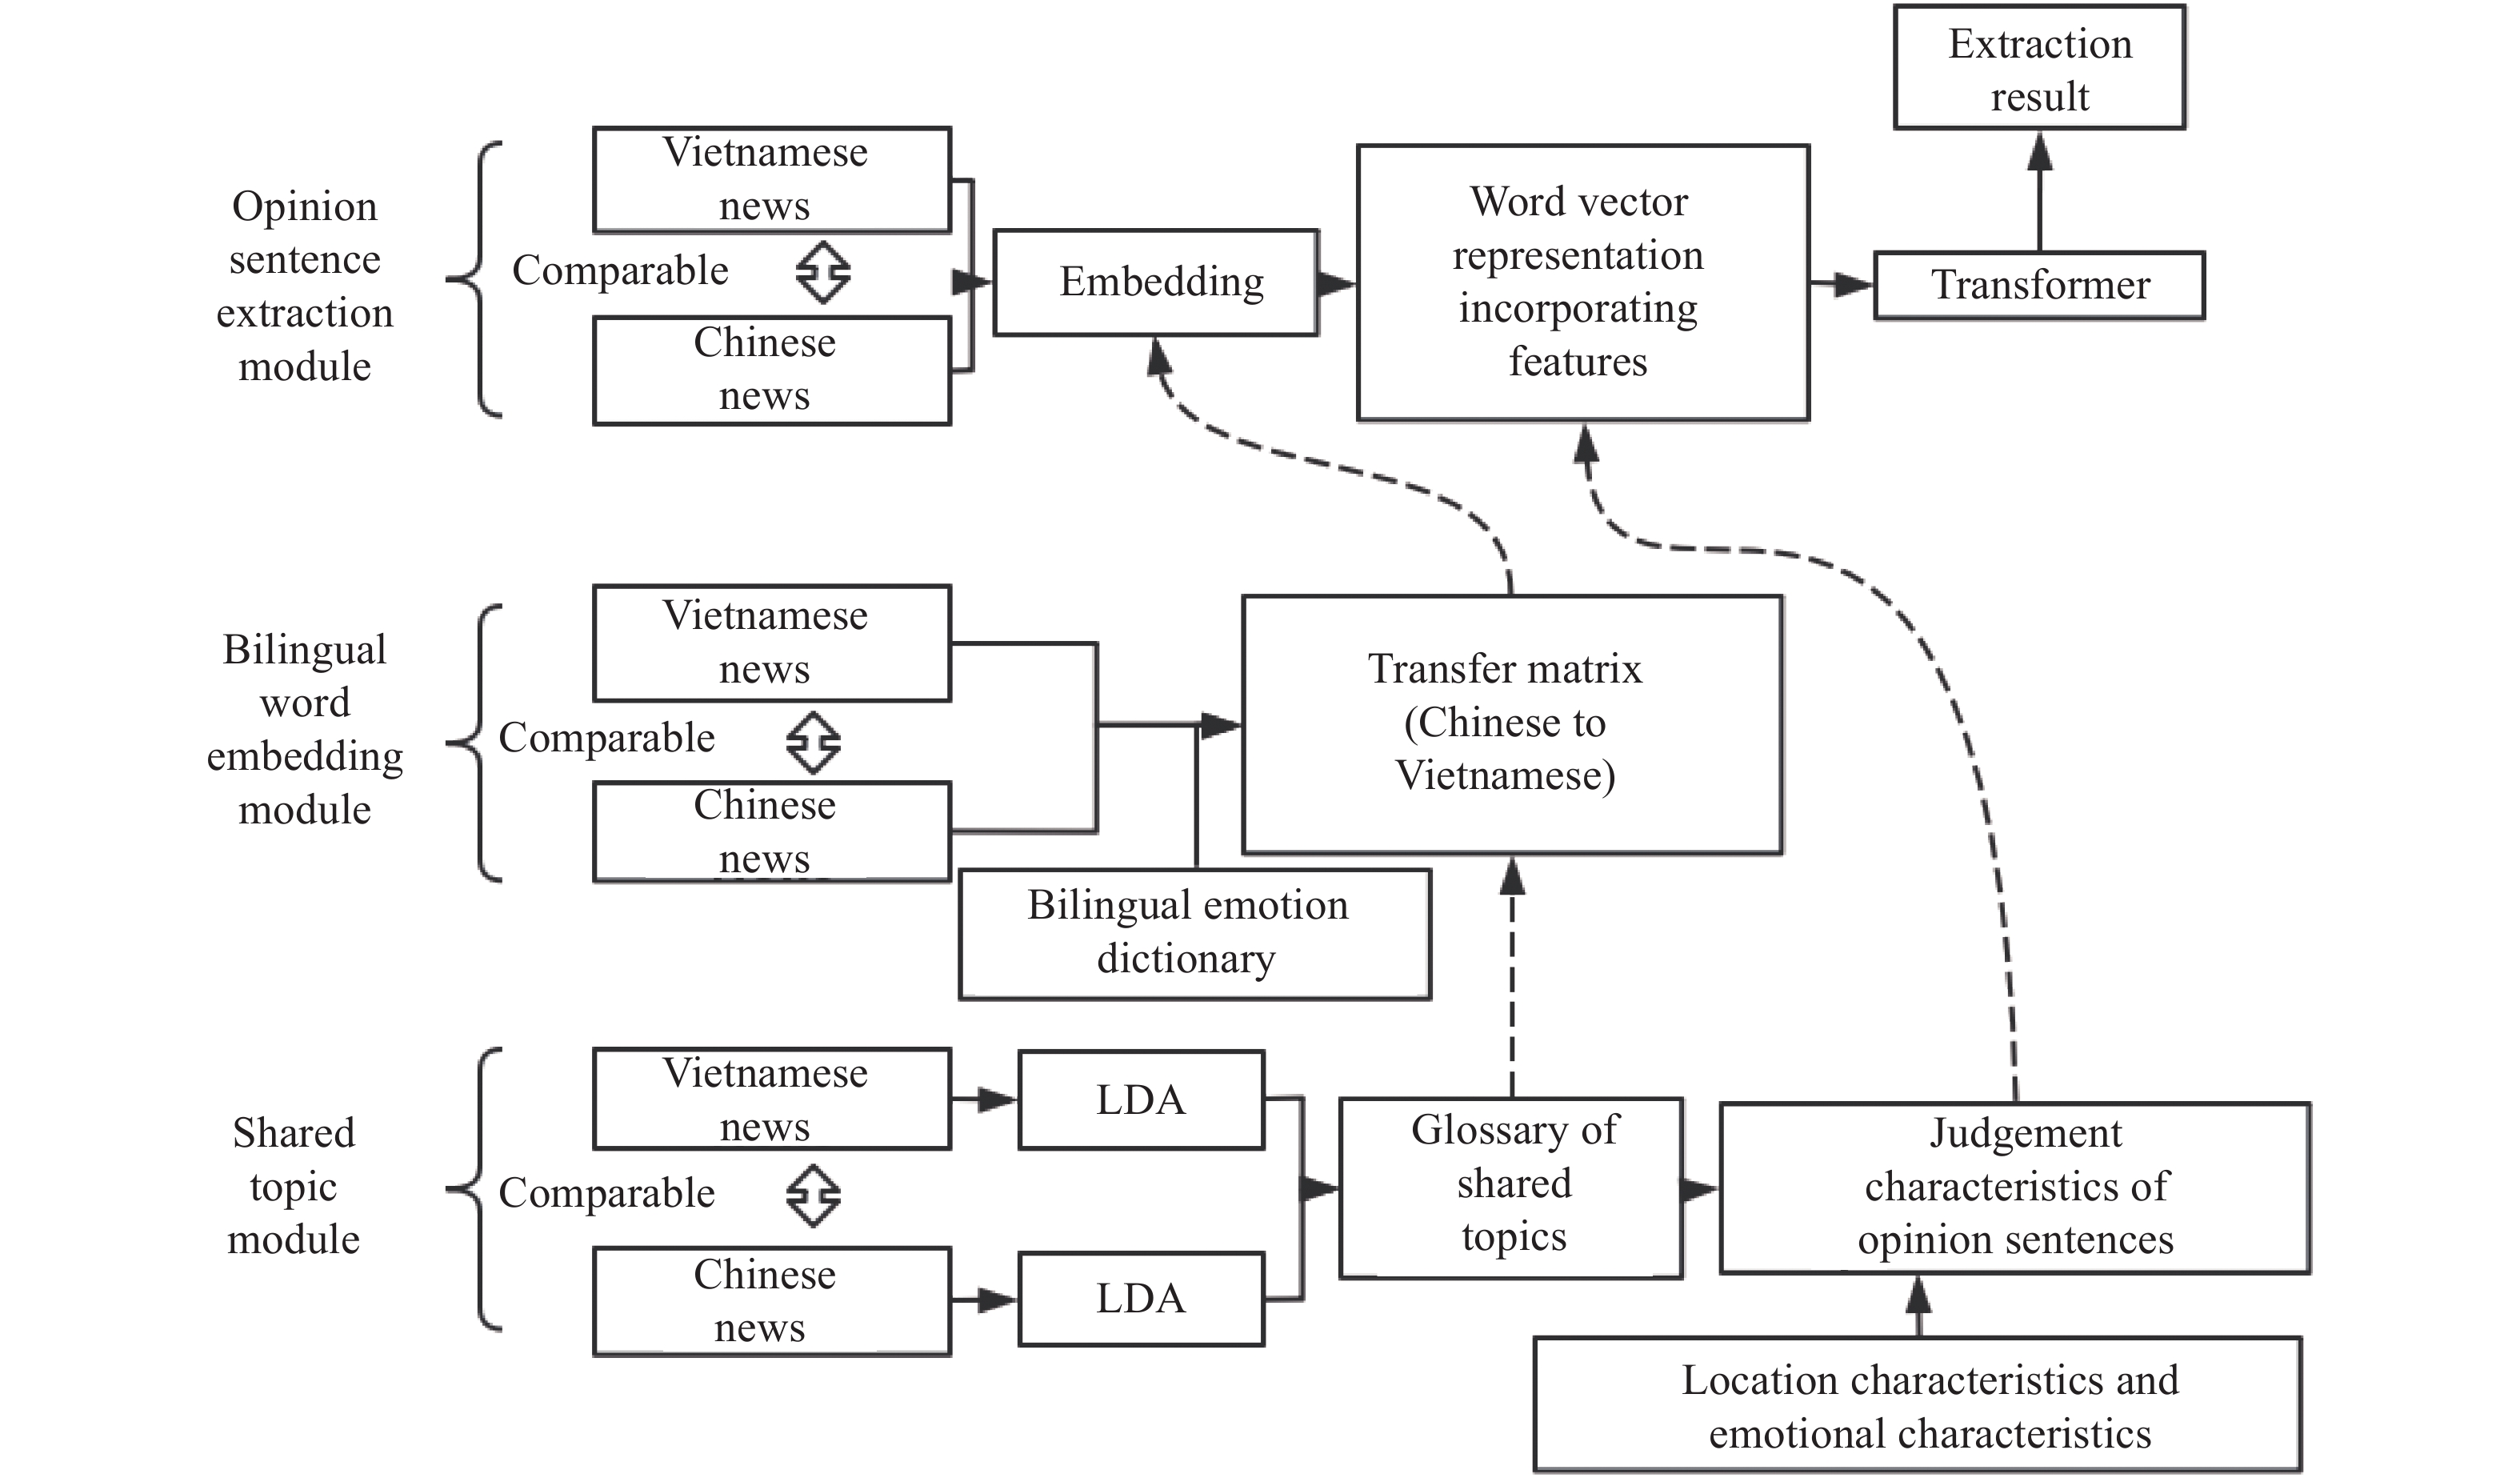 Flow chart of Chinese-Vietnamese news opinion sentence extraction incorporating the characteristics of shared topics